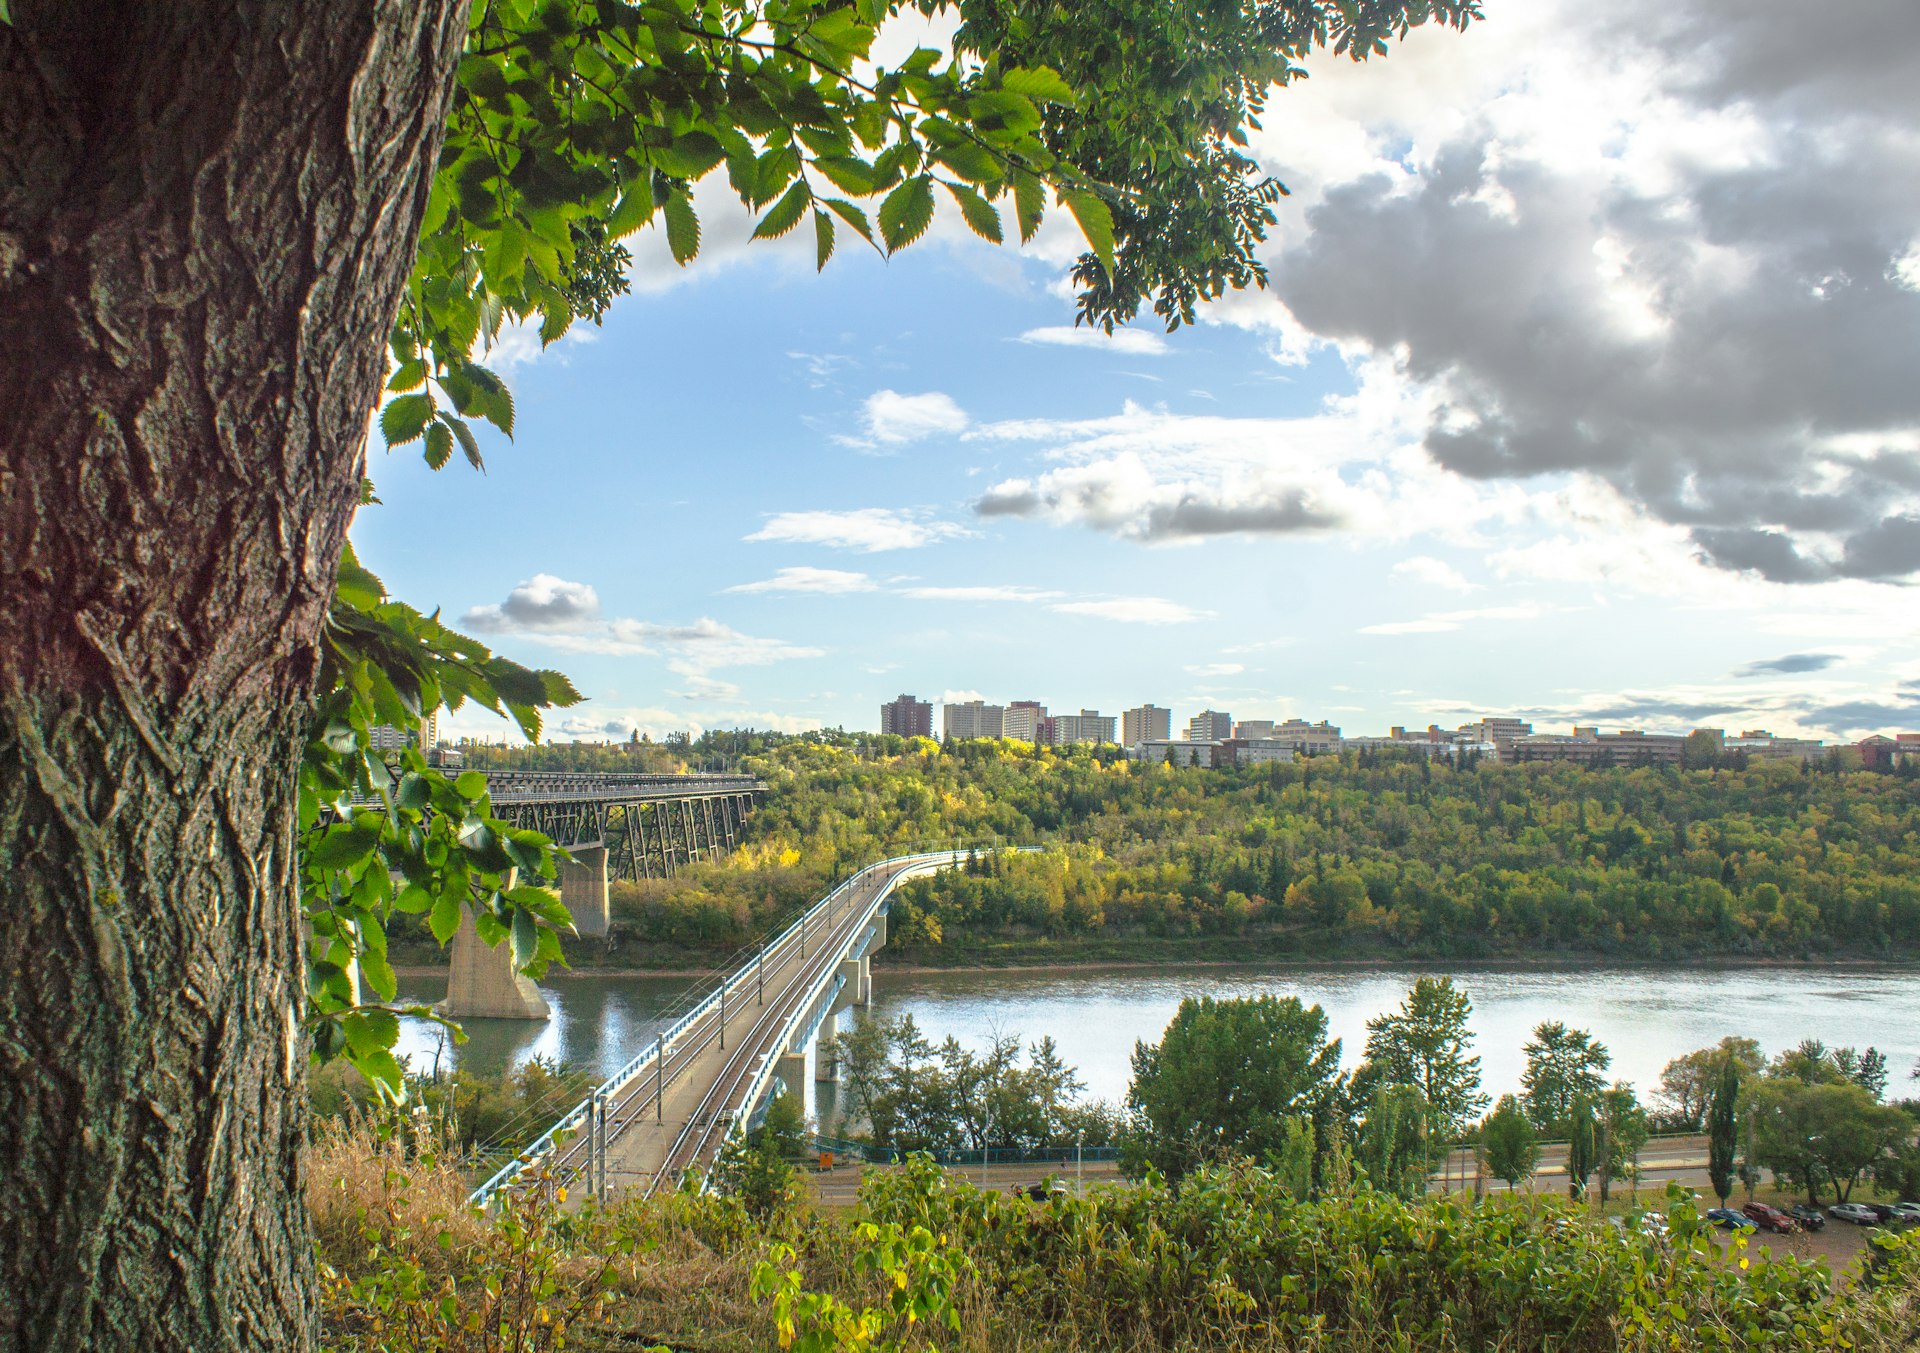 An afternoon view of the North Saskatchewan river valley and downtown Edmonton, the capital of Alberta province. Also visible is the train bride connecting the east and west sides of the city. It is the beginning of Autumn and the leaves have just started turning yellow, orange and red.